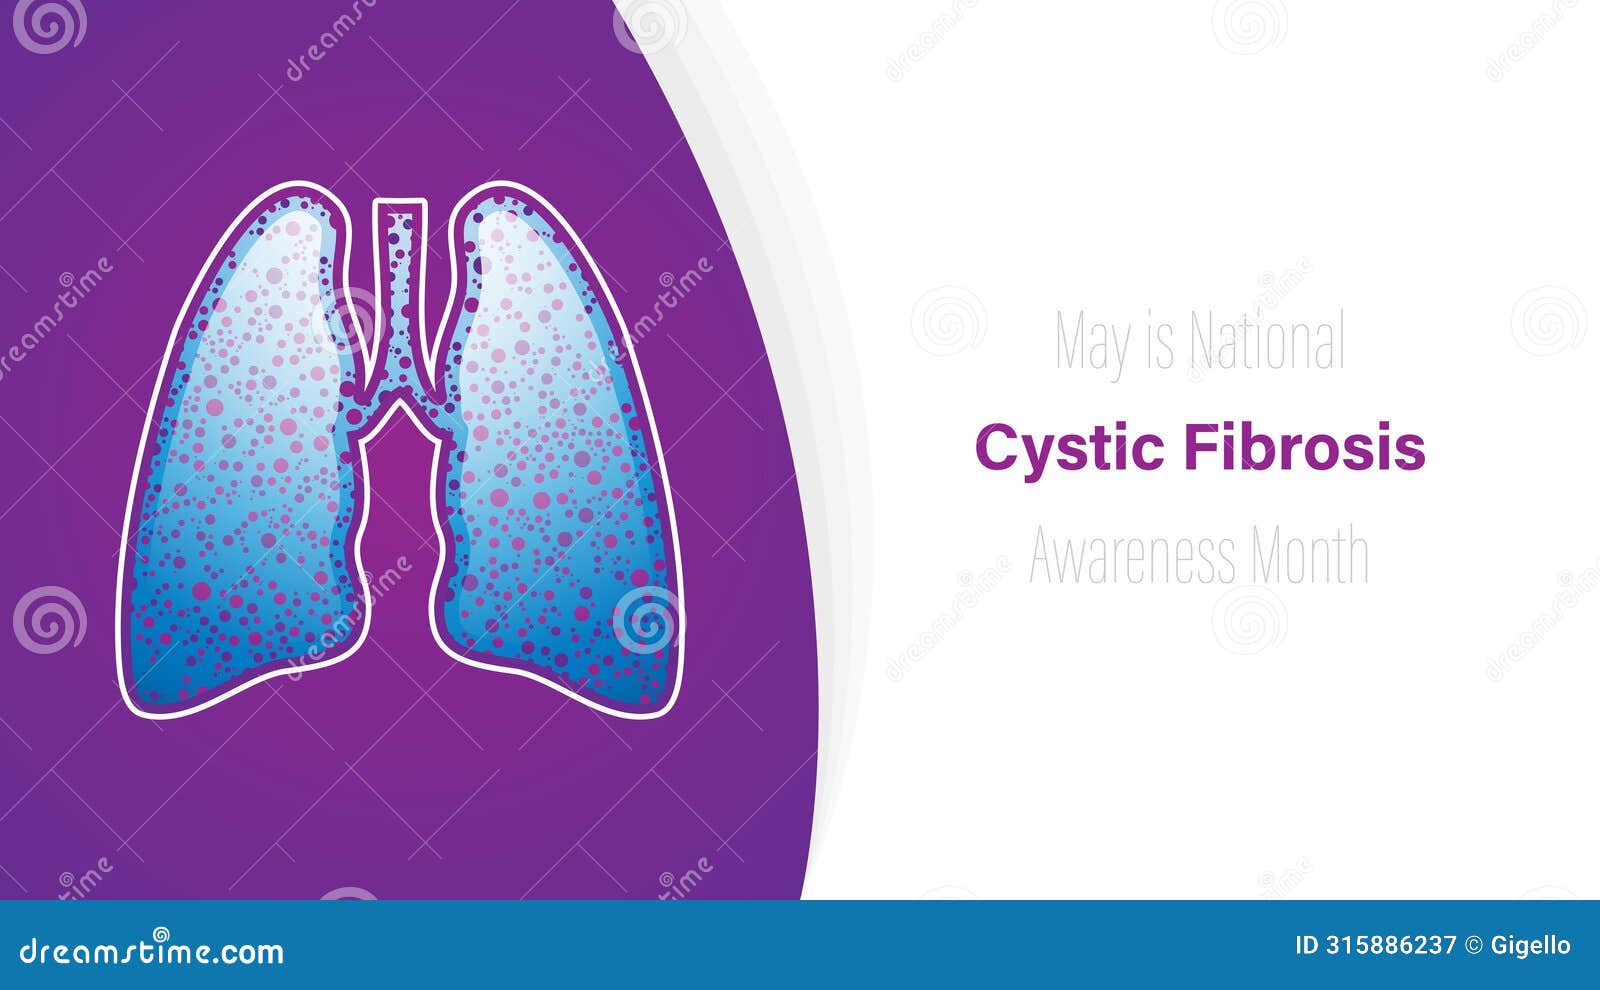 cystic fibrosis awareness month observed every year in may,  